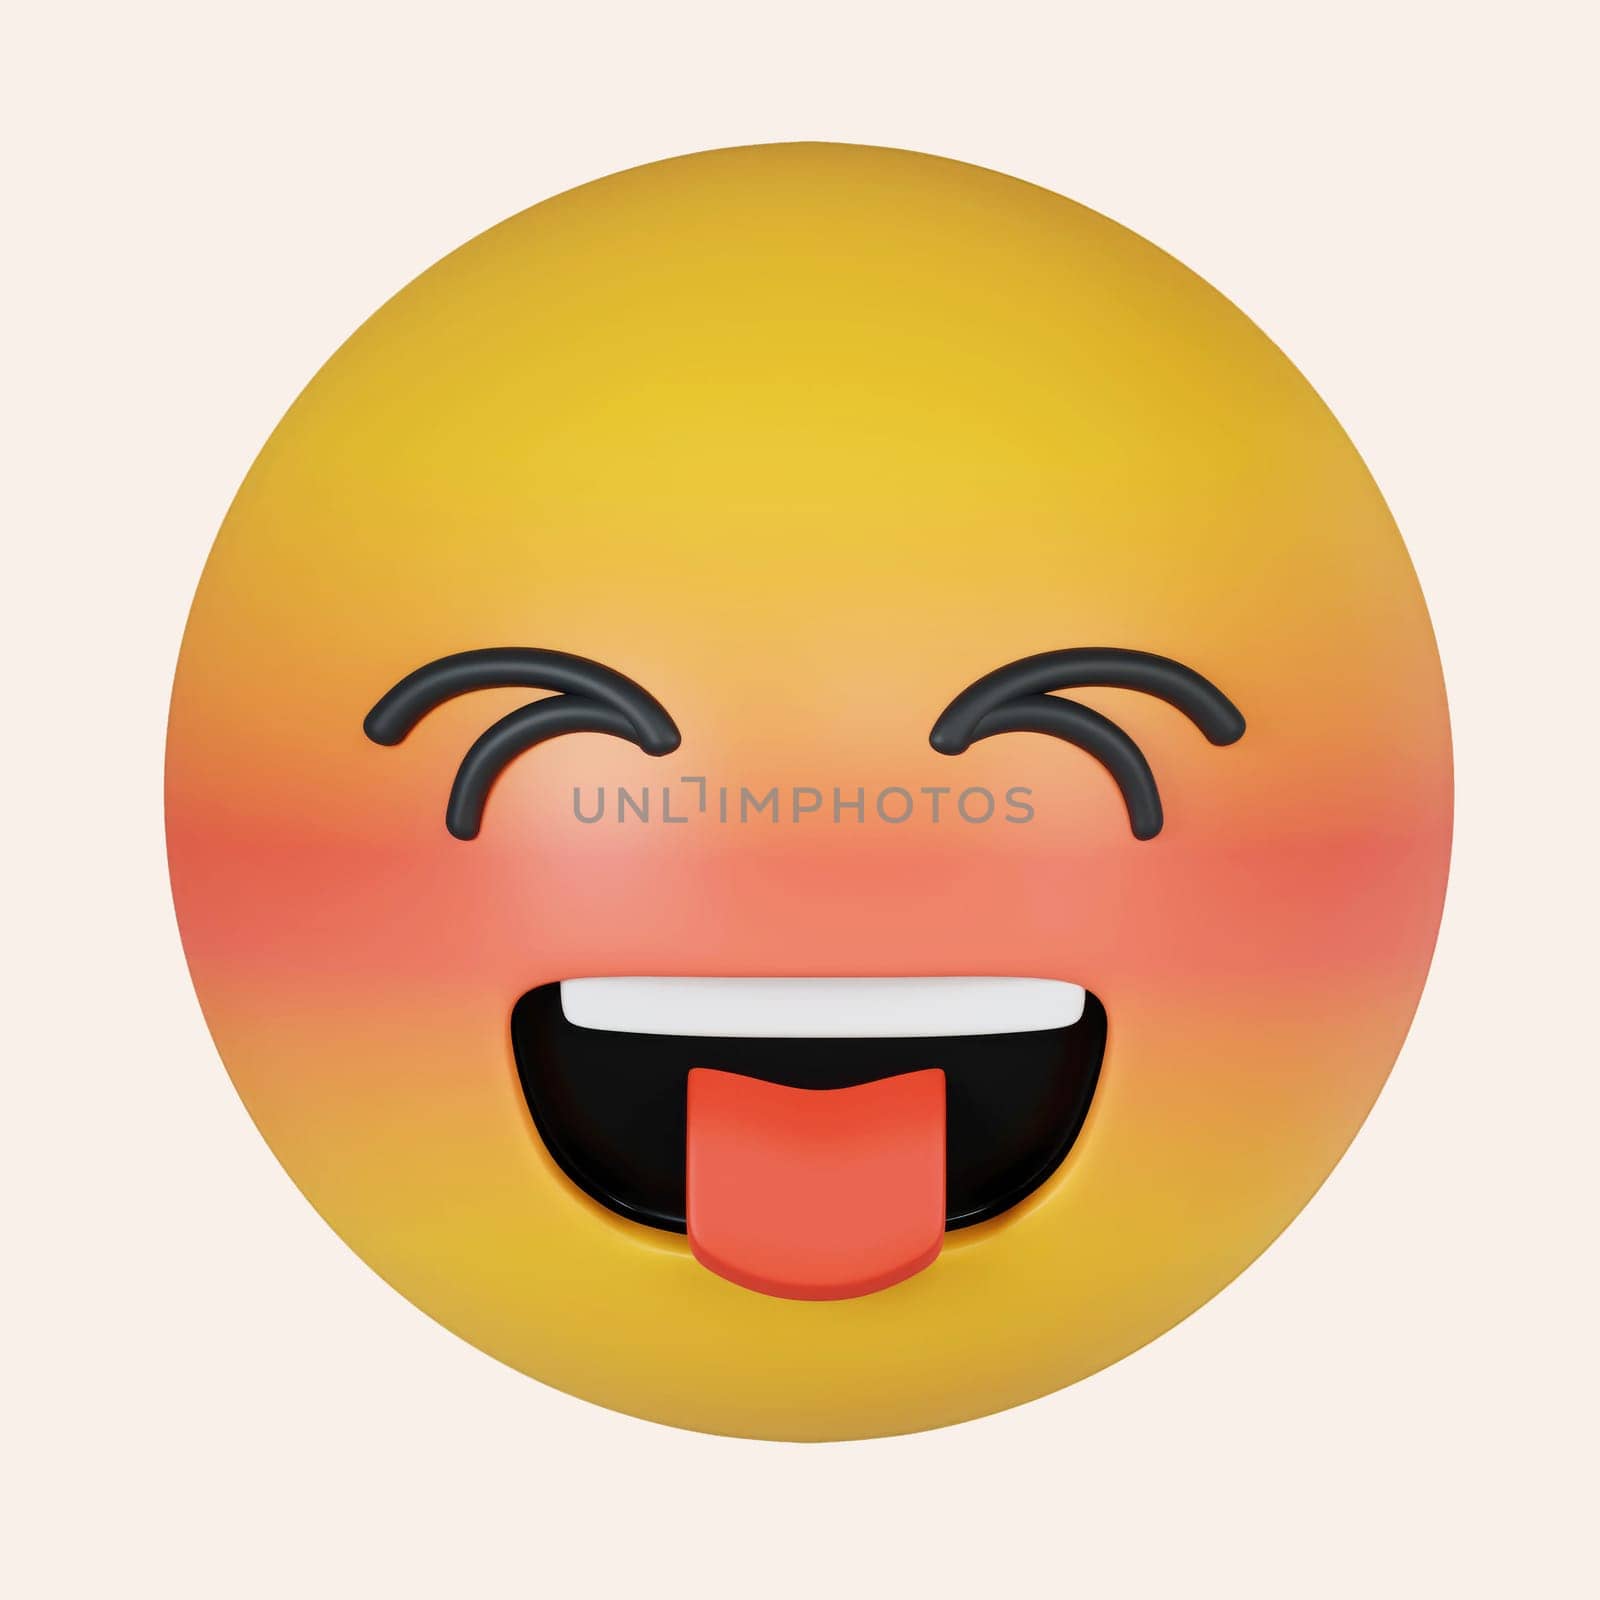 3d Woozy Emoji Face, drunk emoticon, tired emotion. icon isolated on gray background. 3d rendering illustration. Clipping path. by meepiangraphic